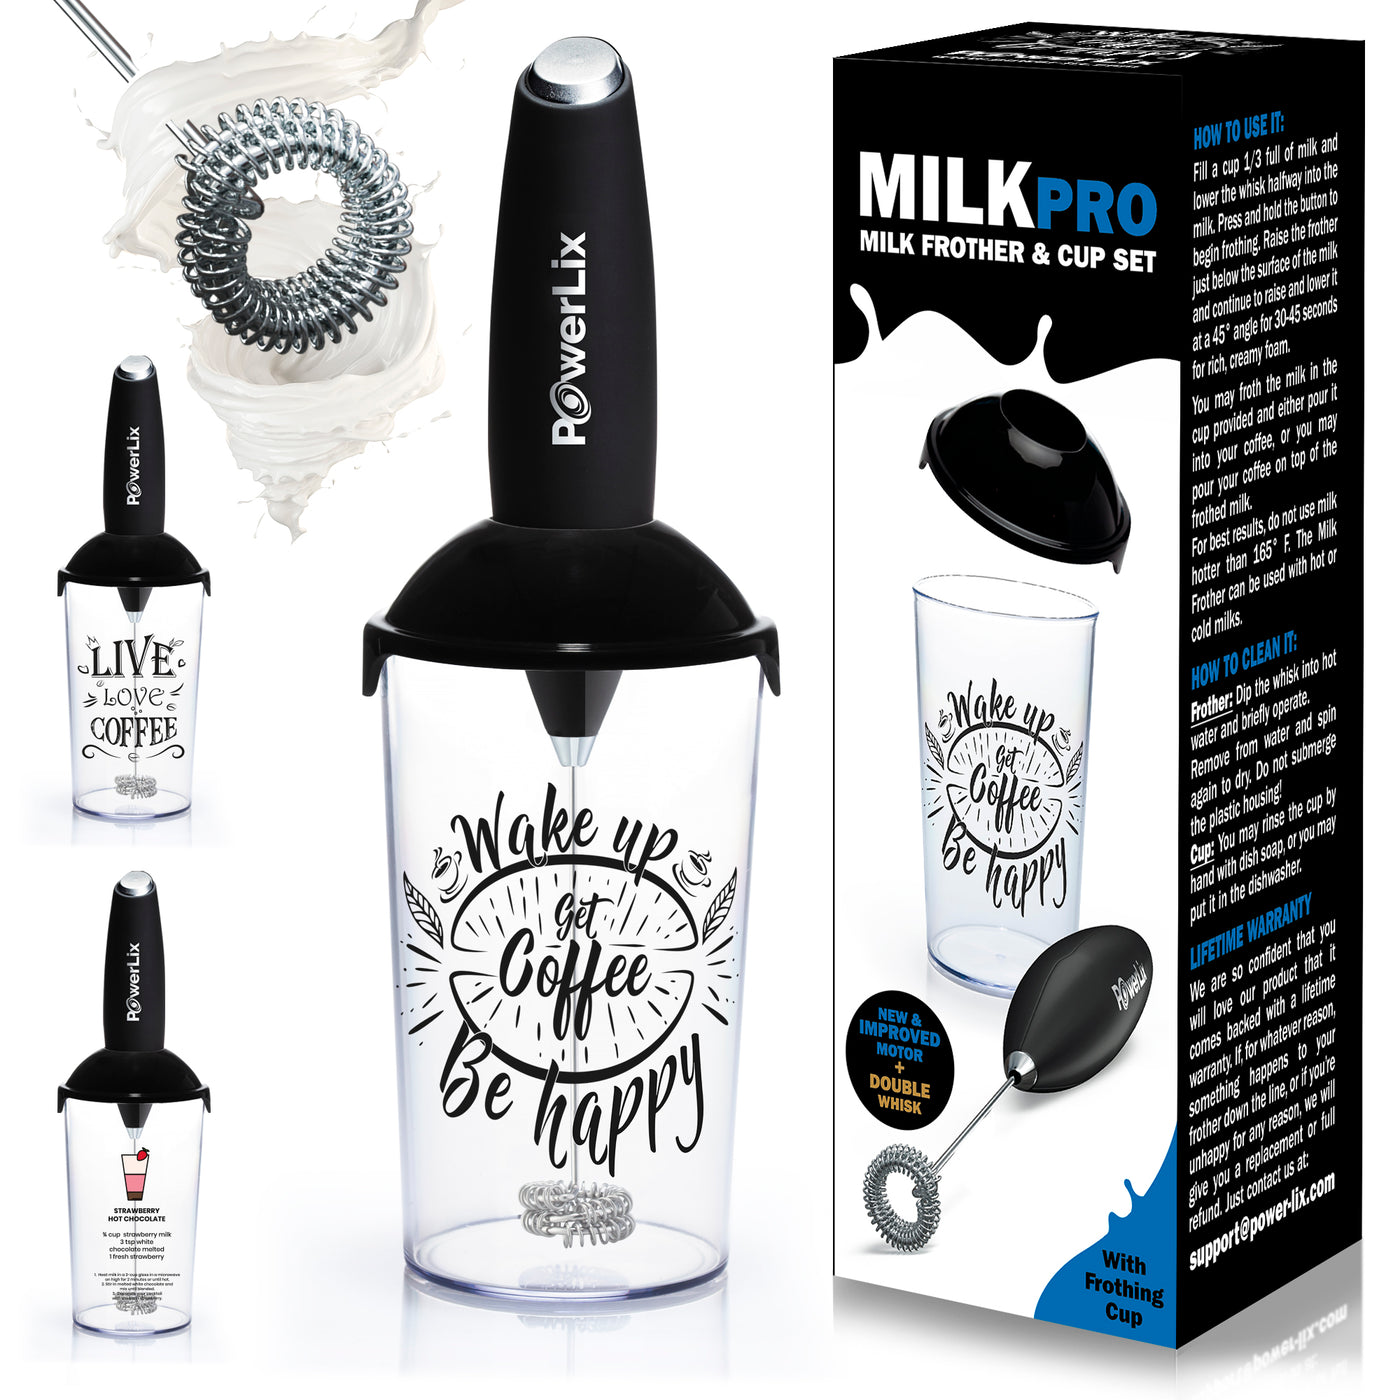 PowerLix™ Milk Frother - New Double whisk + Foamer Cup